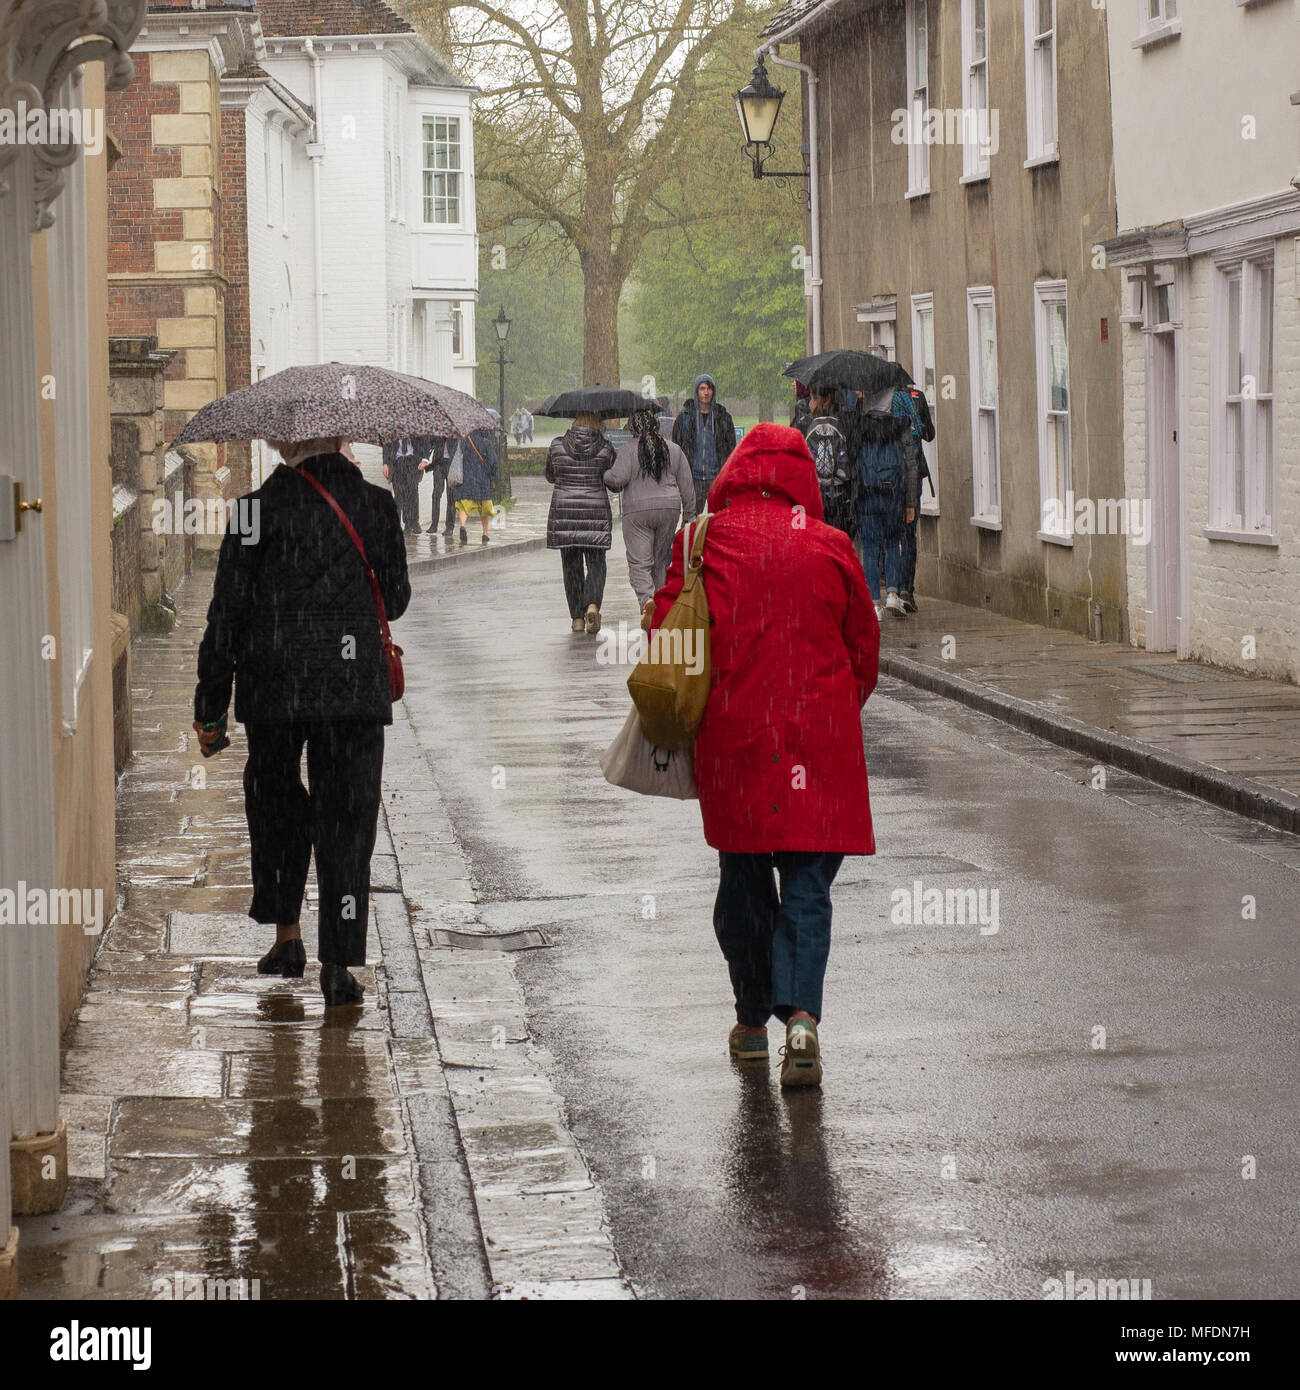 People walking with umbrellas during a heavy April rain shower in the entrance to Cathedral Close, Salisbury, Wiltshire, UK Stock Photo